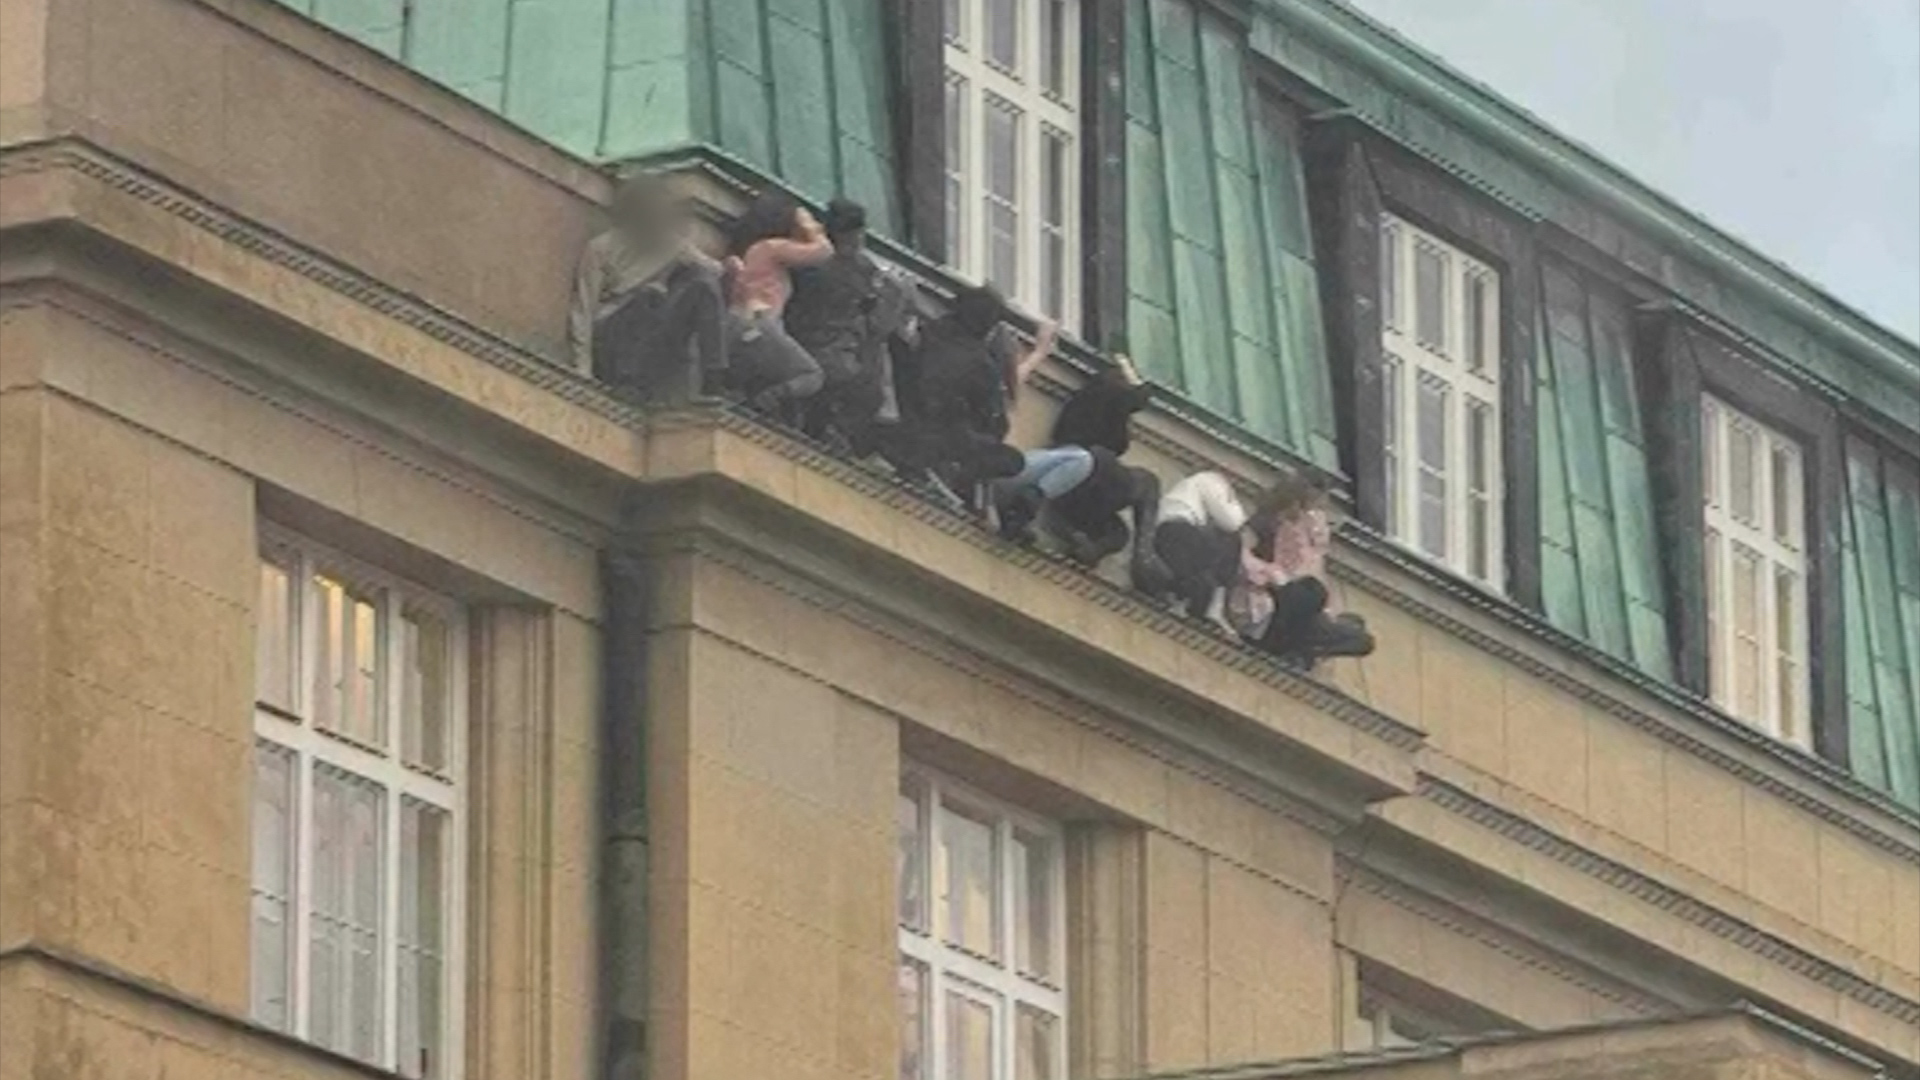 Students are seen hiding on a ledge at Charles University. A portion of this photo has been blurred by CNN to protect identity.